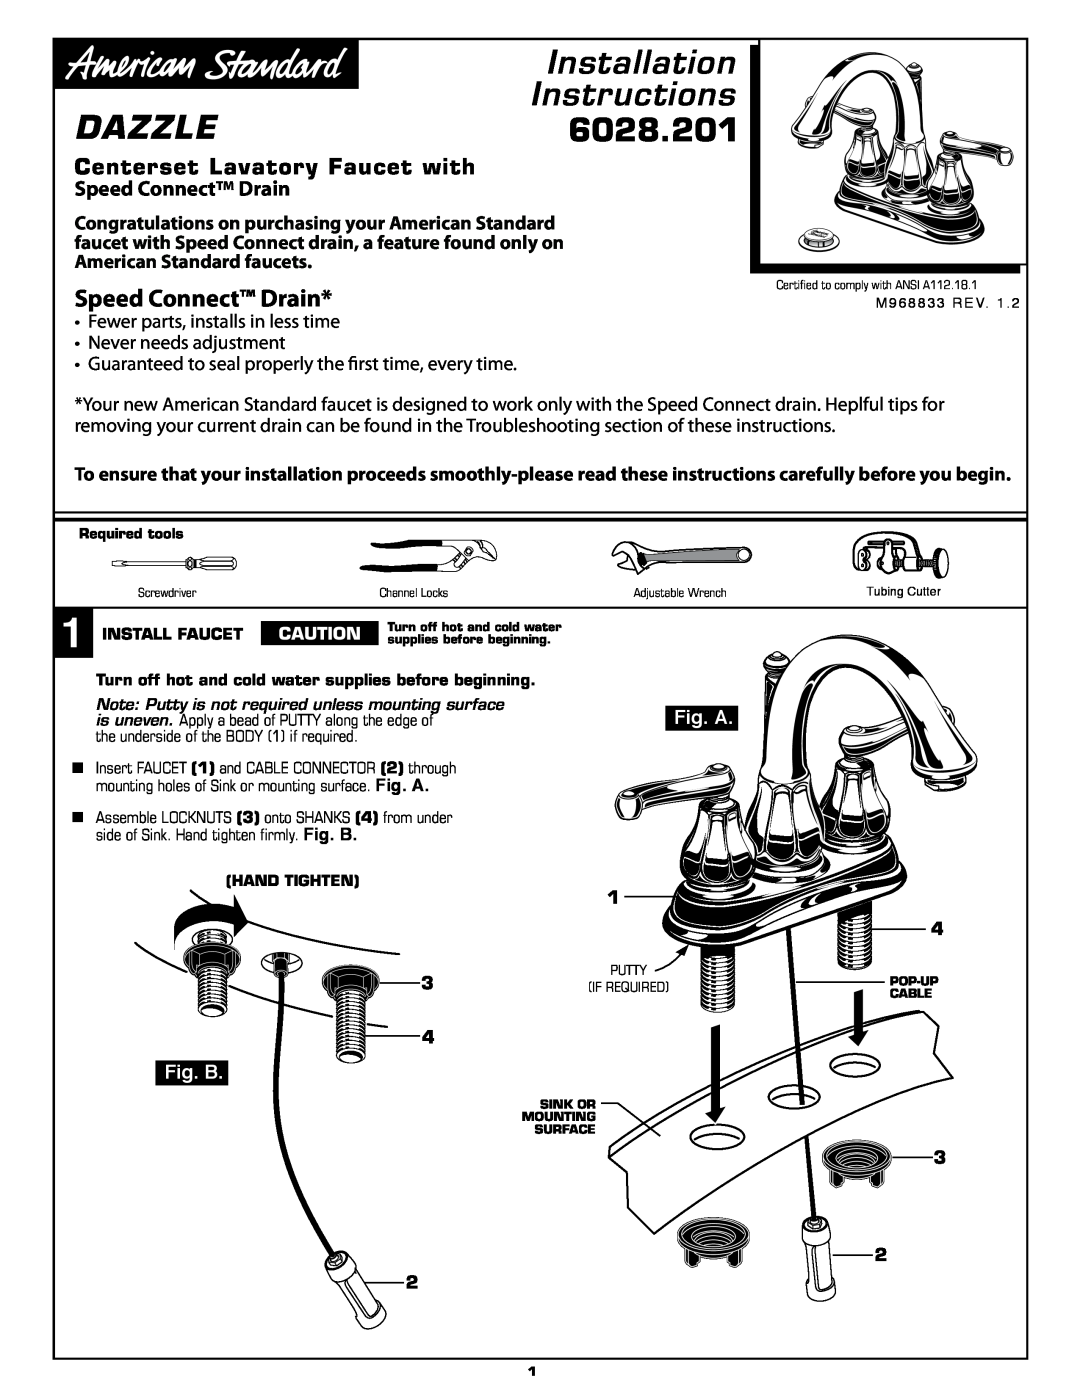 American Standard 6028.201 installation instructions Speed Connect Drain, Centerset Lavatory Faucet with, Install Faucet 